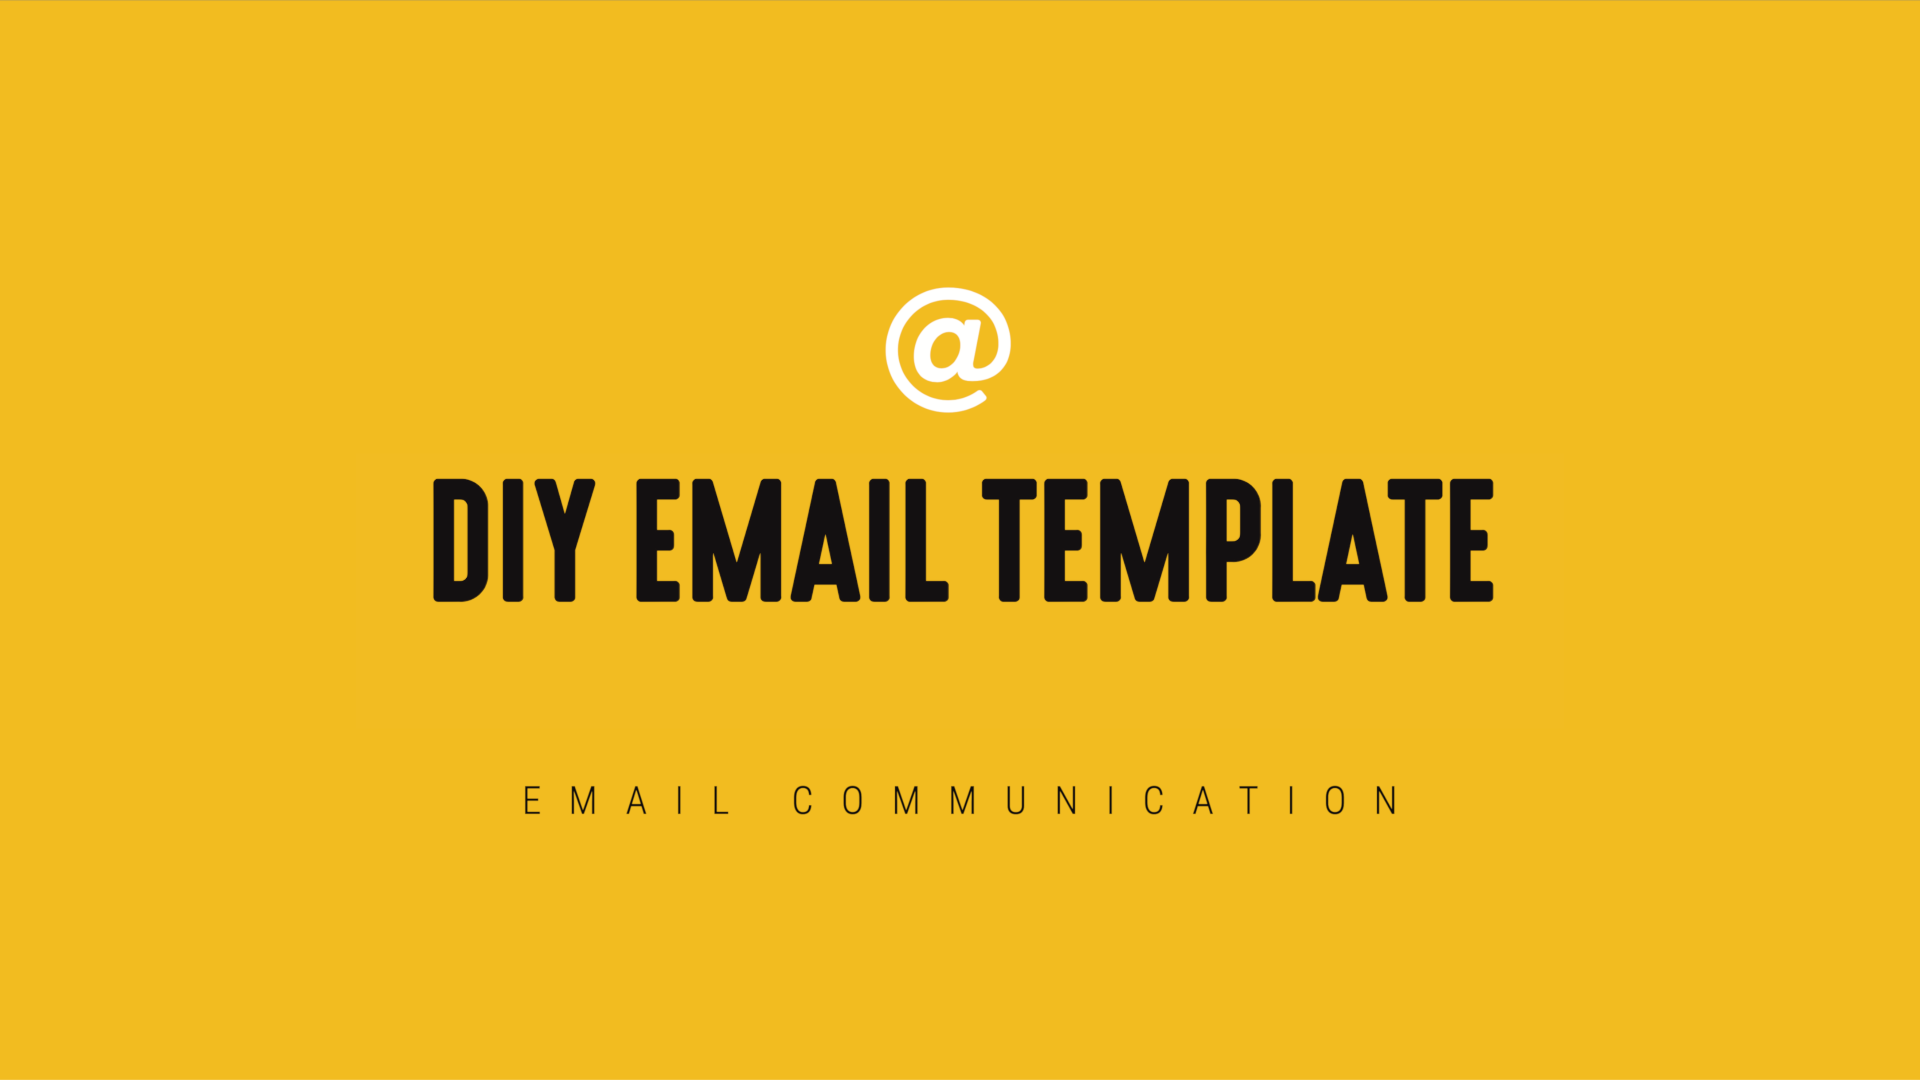 [NEW] DIY Email Template